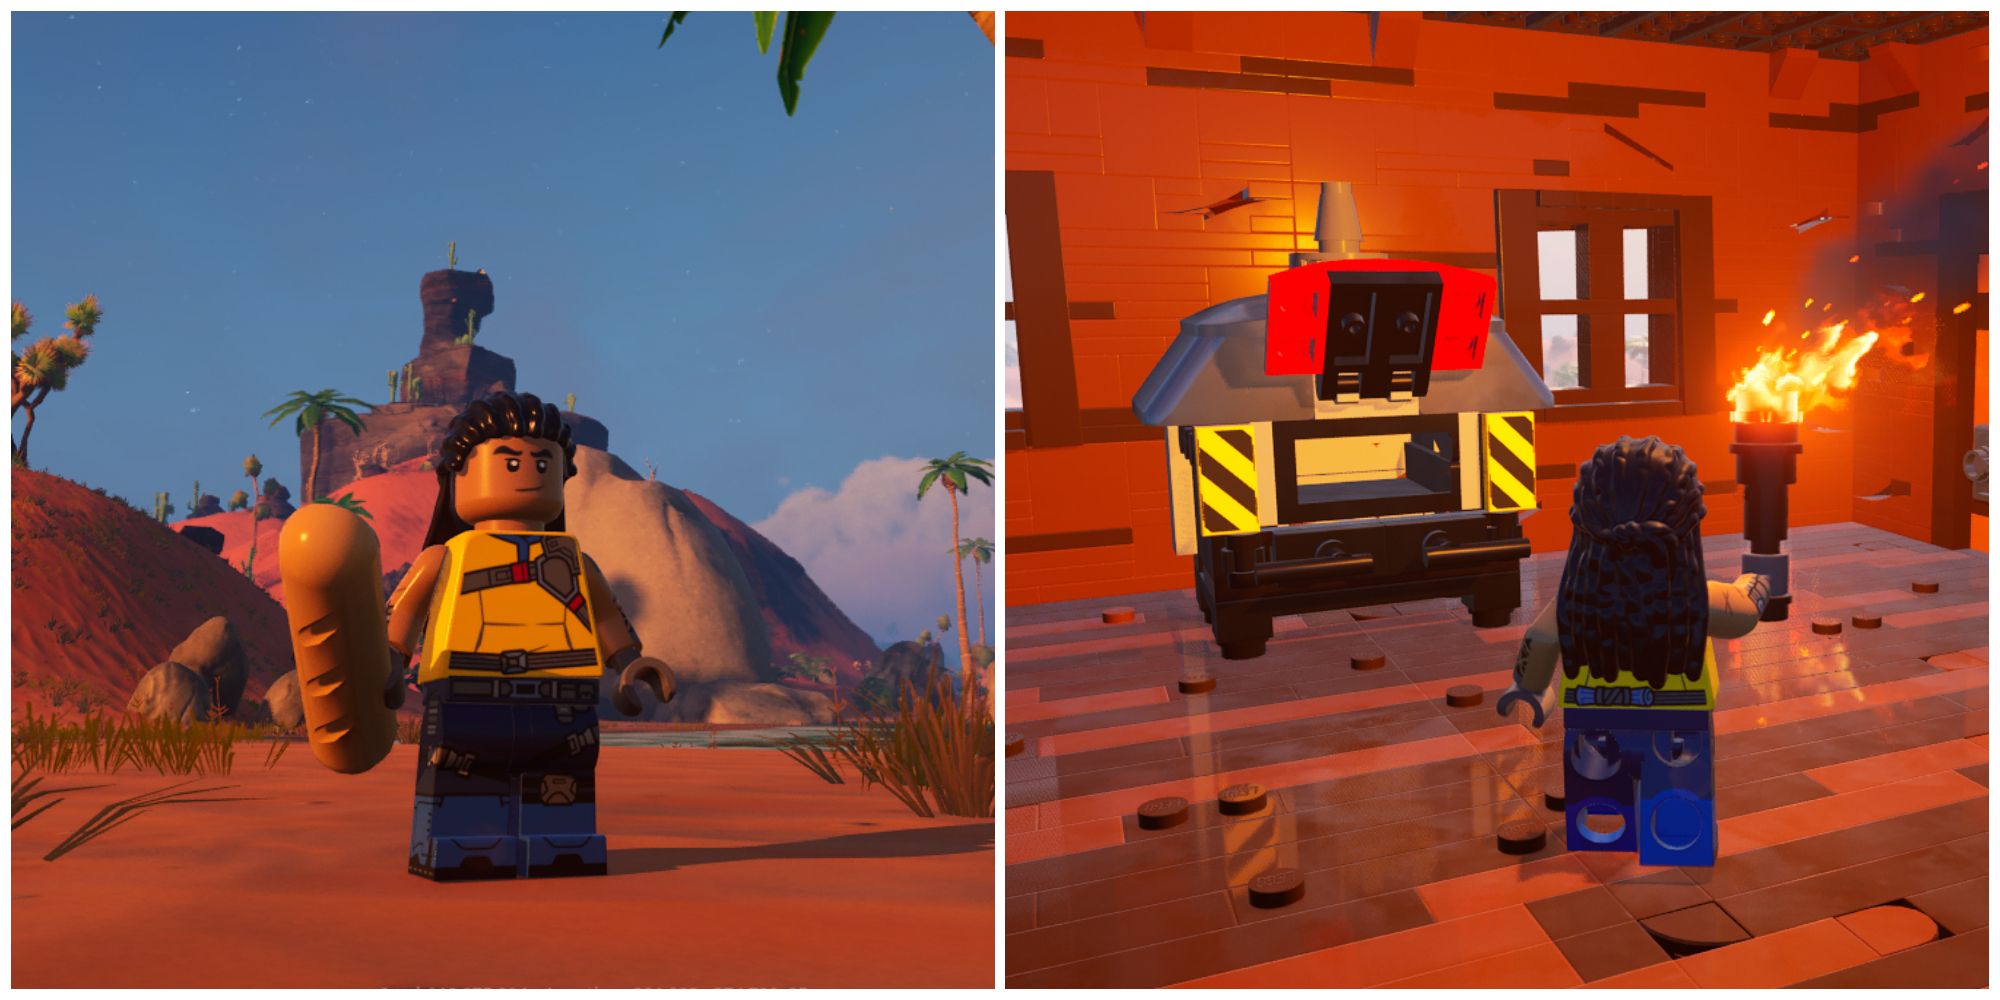 Split image of a character holding bread and a character standing in front of an oven in Lego Fortnite